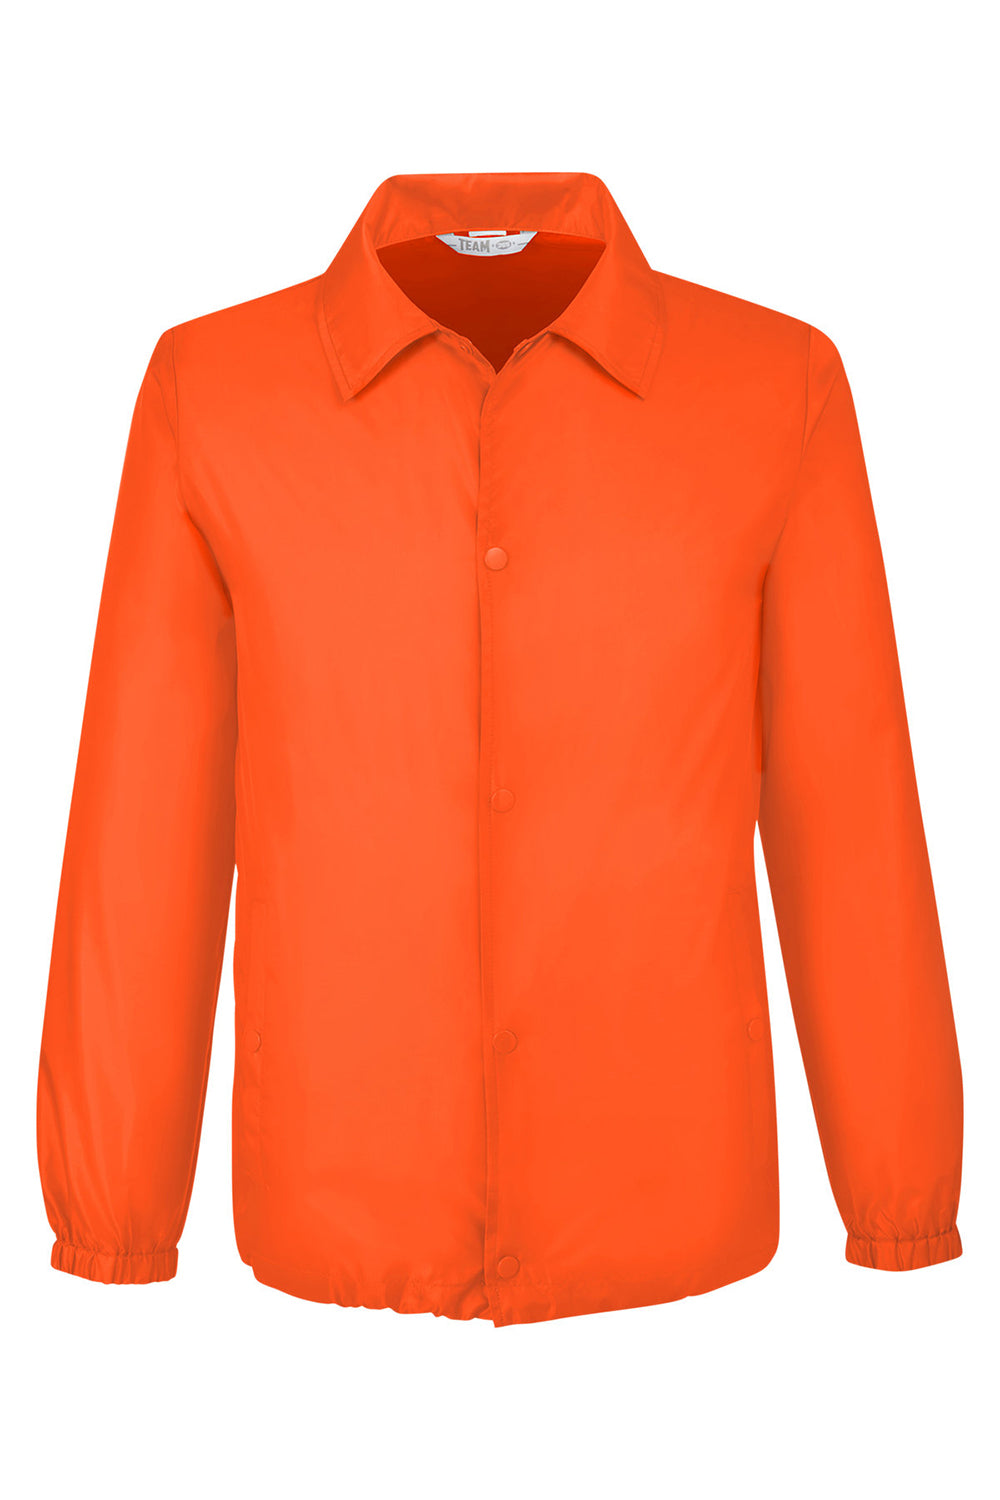 Team 365 TT75 Mens Zone Protect Snap Down Coaches Jacket Orange Flat Front